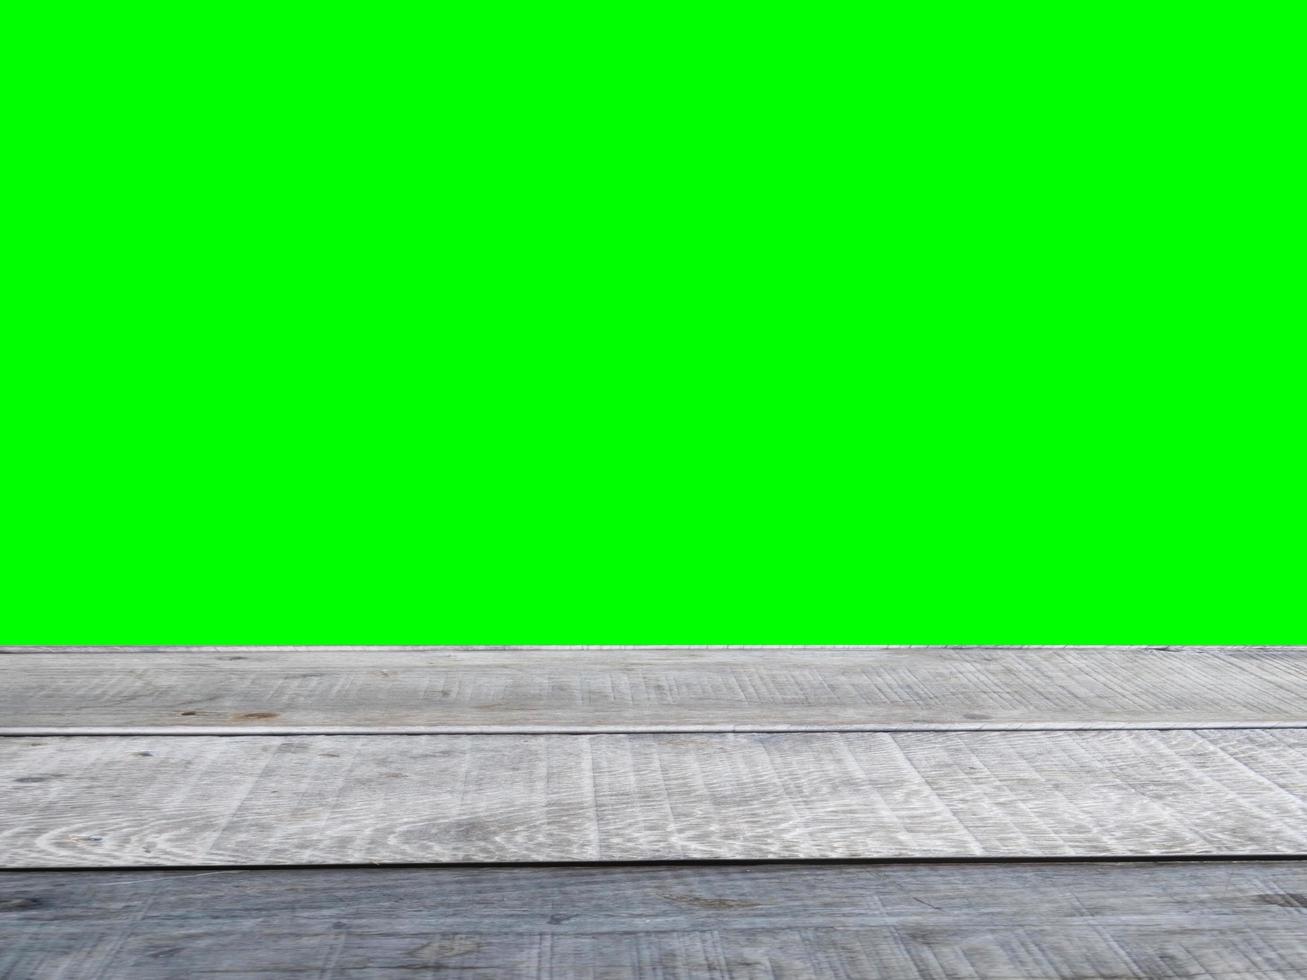 shelf plank green screen background  green screen gray wooden table concept exhibit advertisement product photo